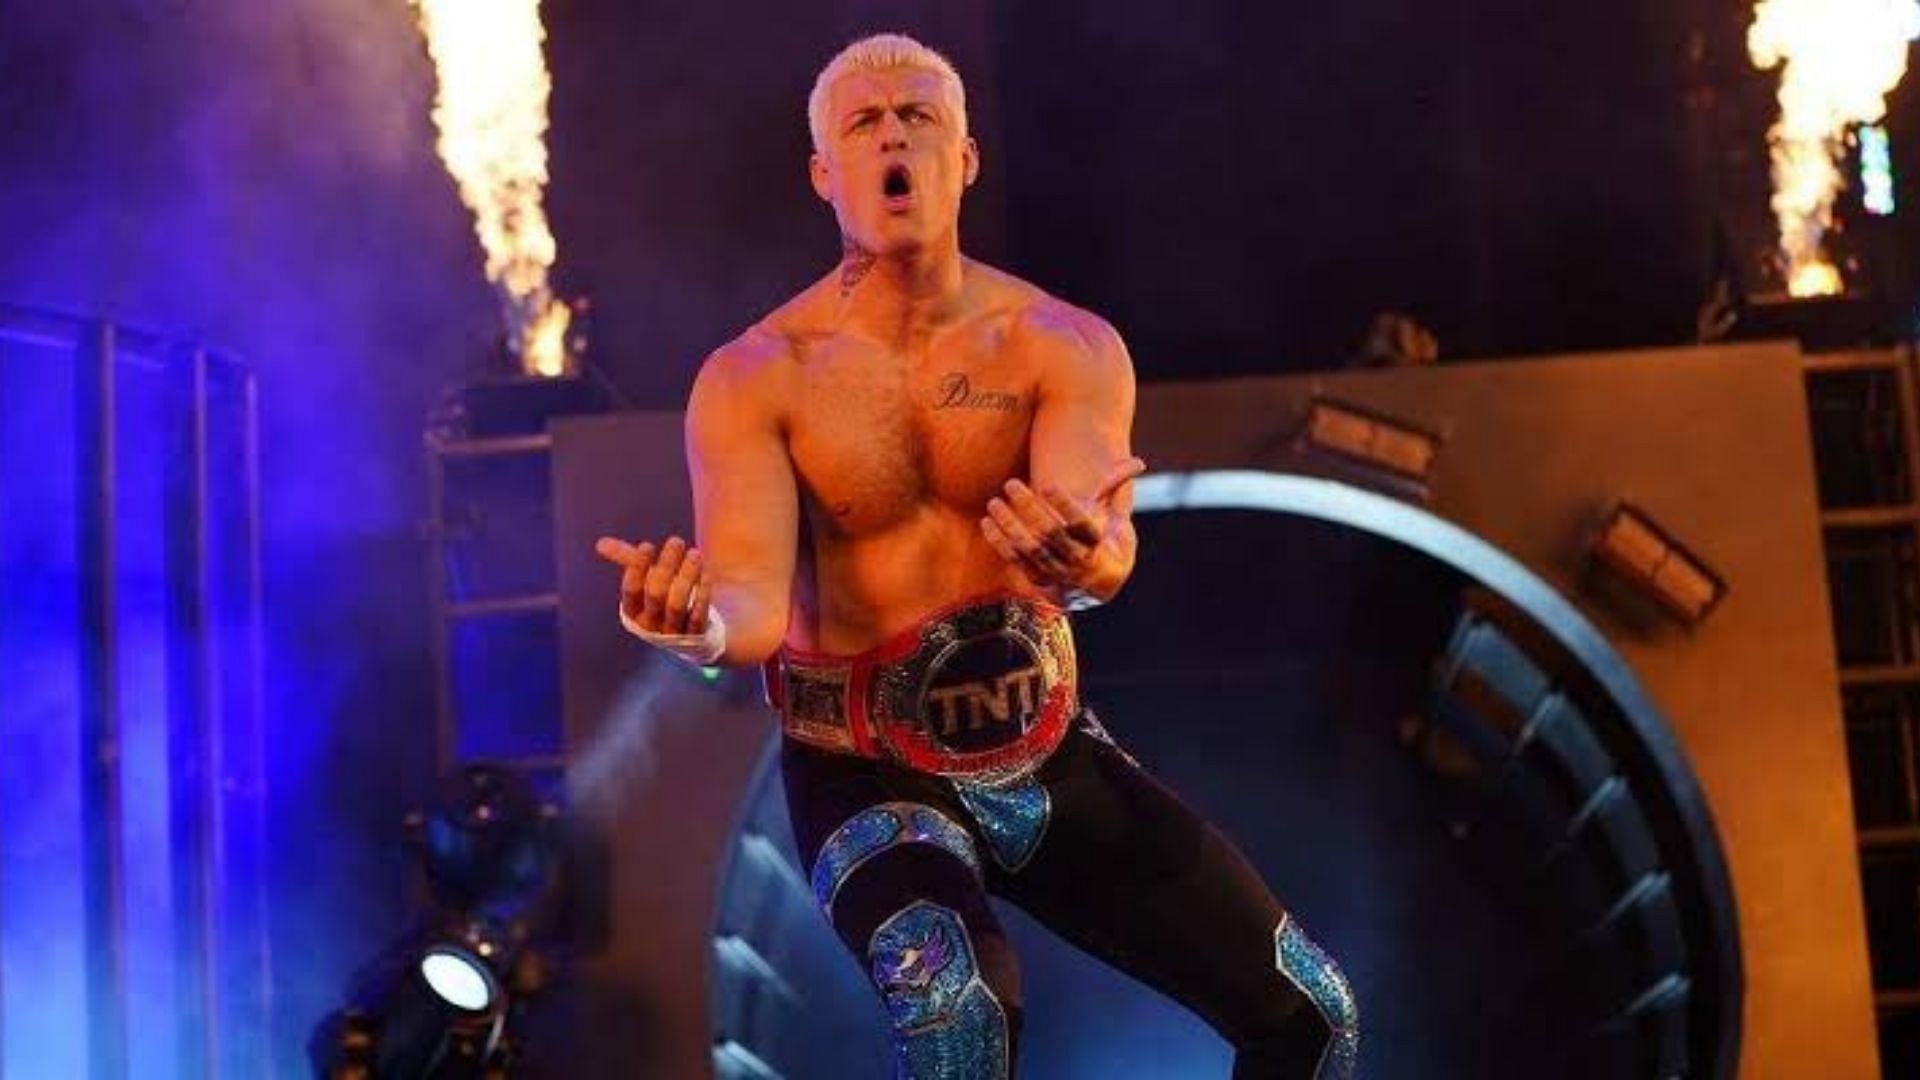 Could Cody Rhodes actually return at the Royal Rumble 2022?